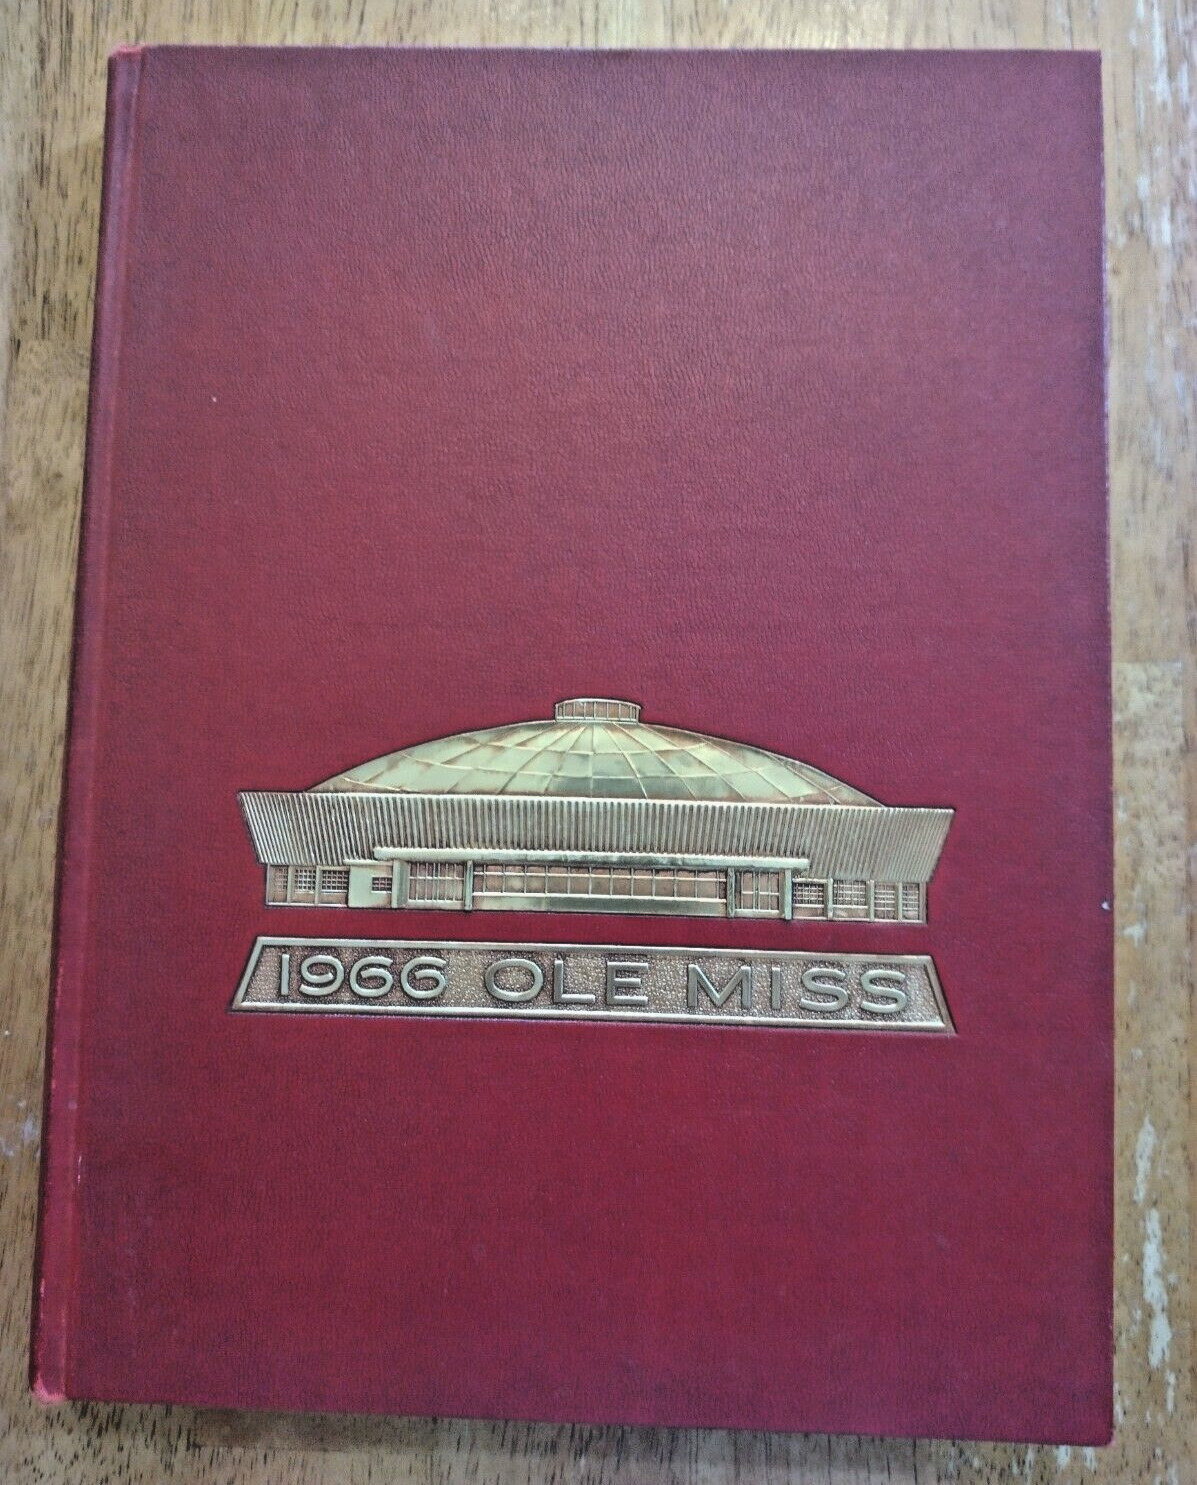 University of Mississippi 1966 Ole Miss Yearbook Robert Kennedy Righteous Bros